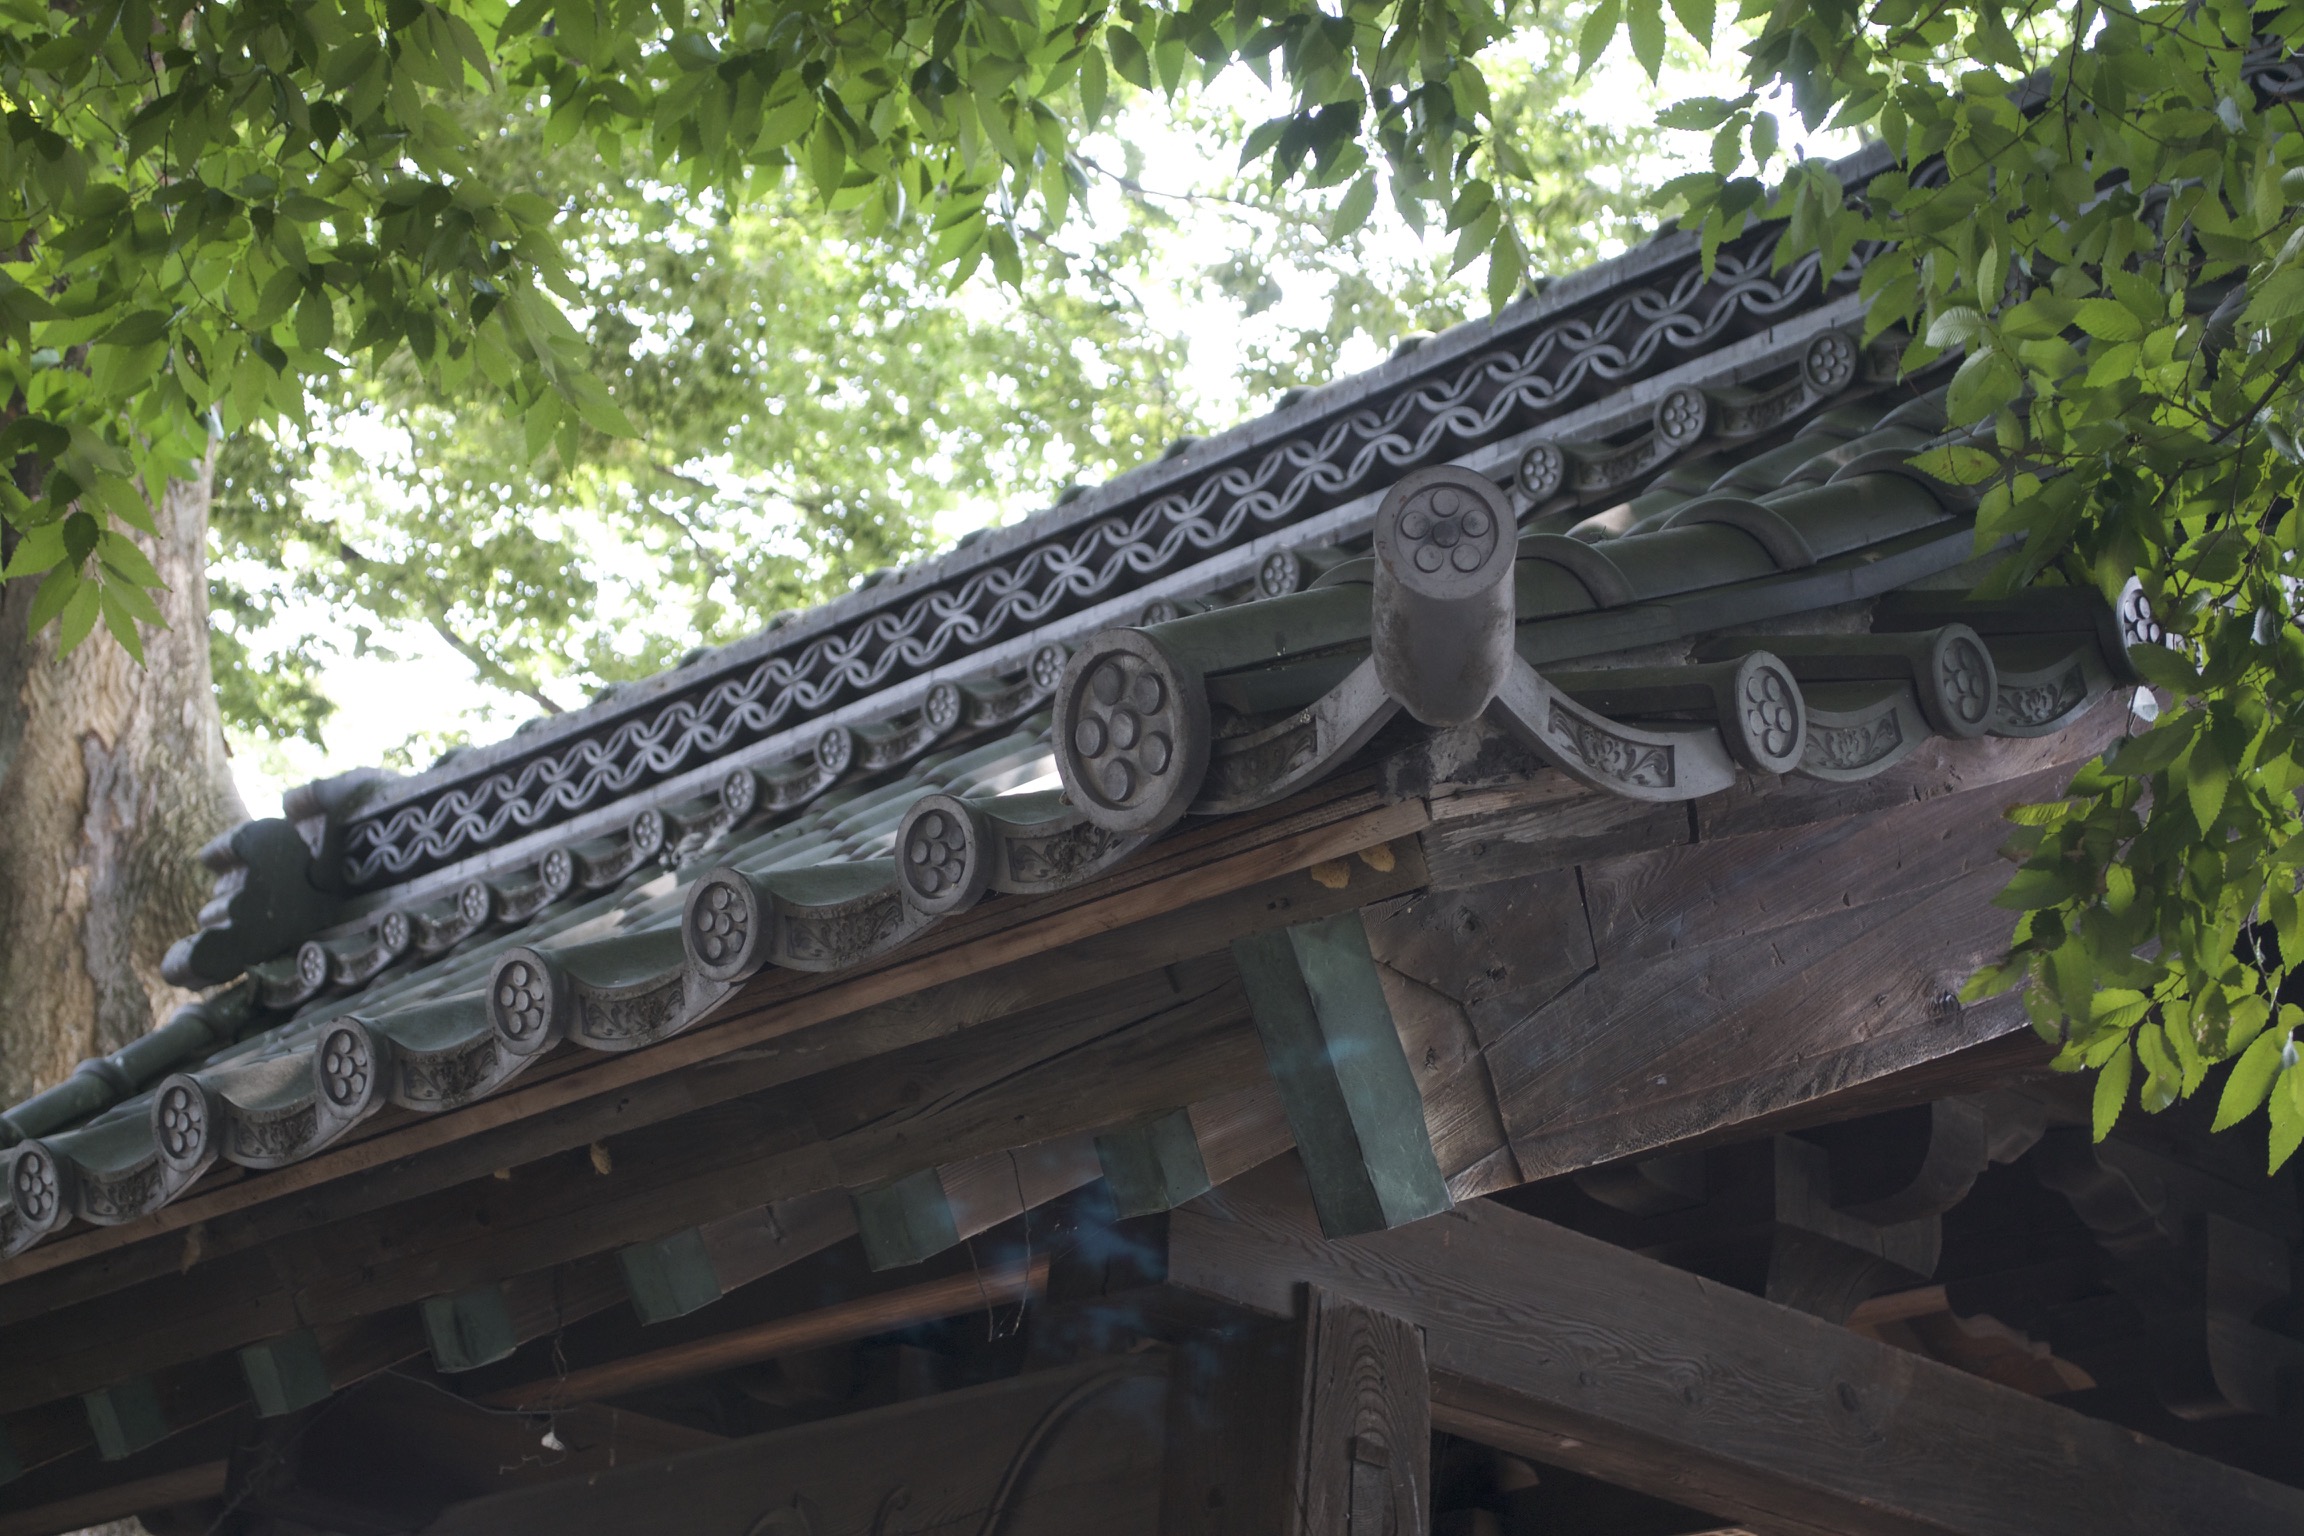 A closeup of roof tiles on a nearby temple.